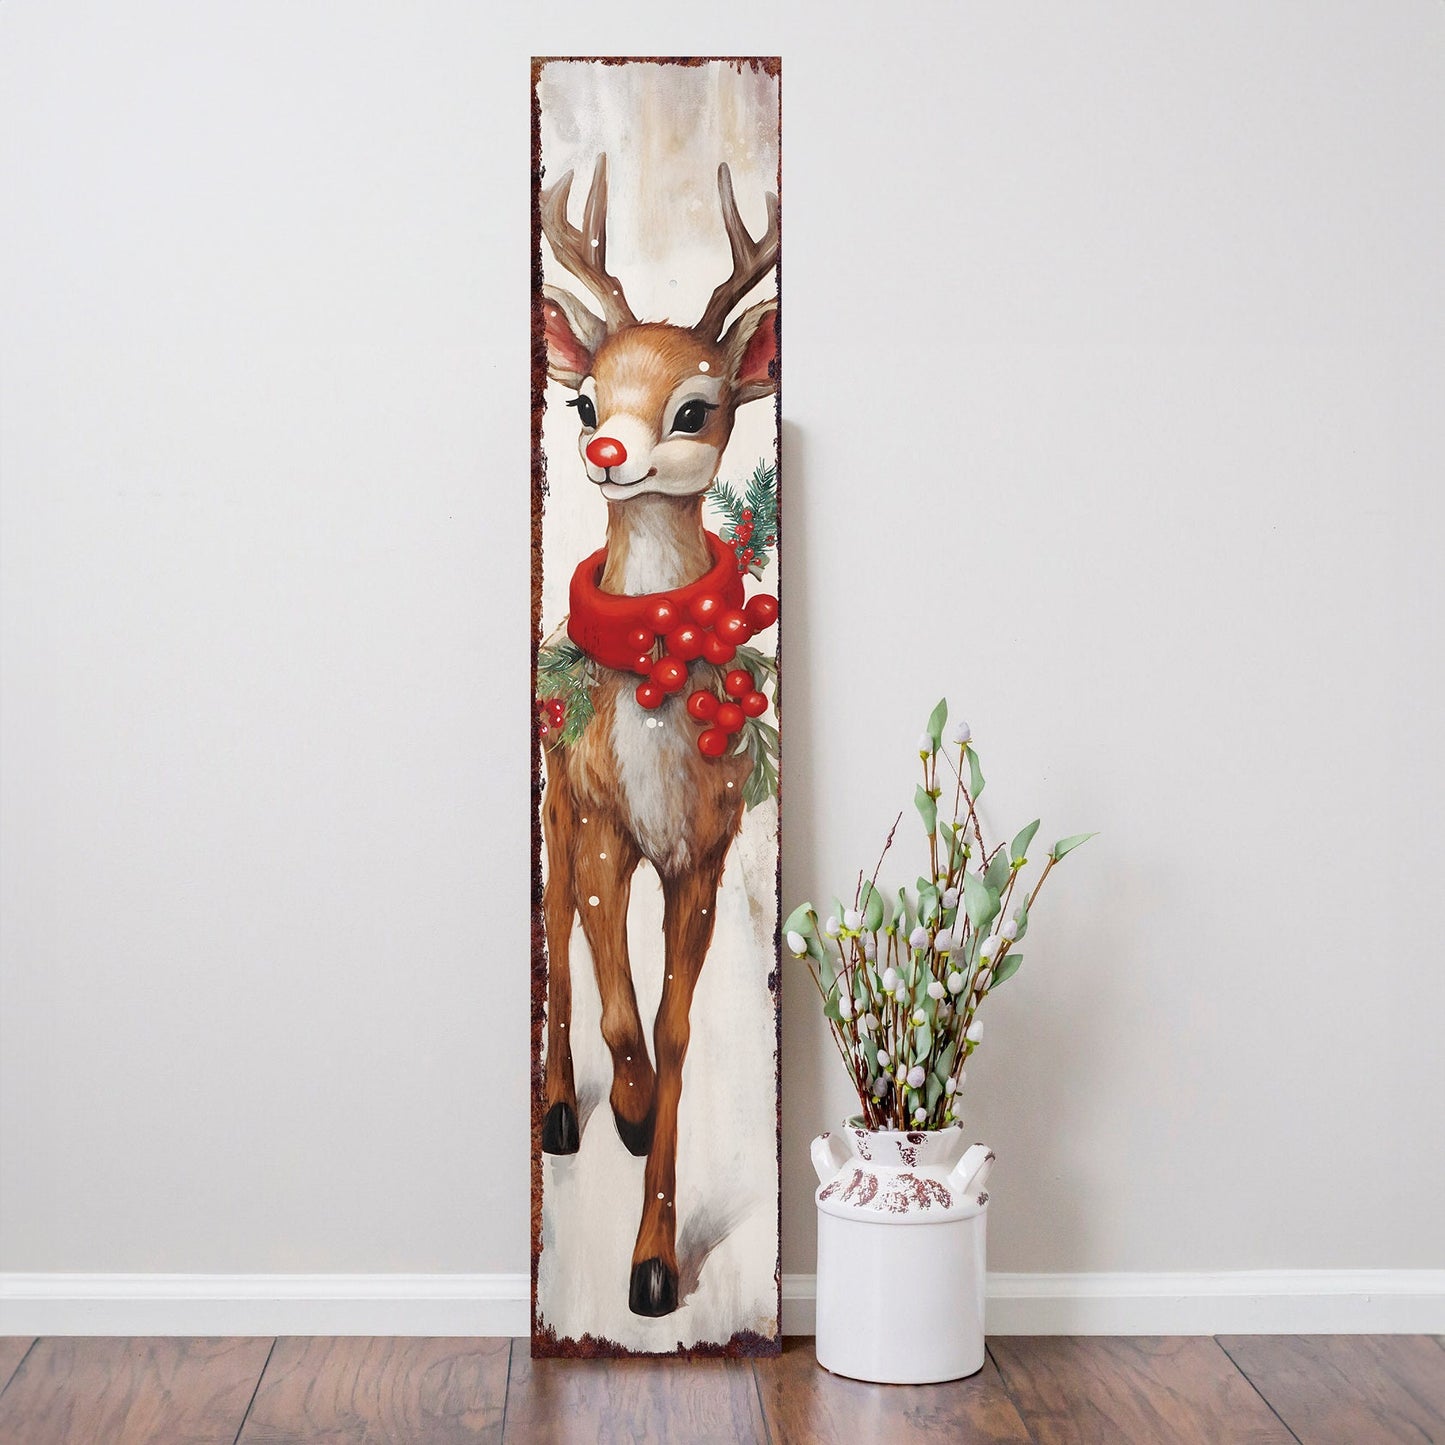 48in Rudolph Christmas Sign - Vintage Holiday Decor, Christmas Porch Decor, Vintage Reindeer Sign, Outdoor Holiday Christmas Decor